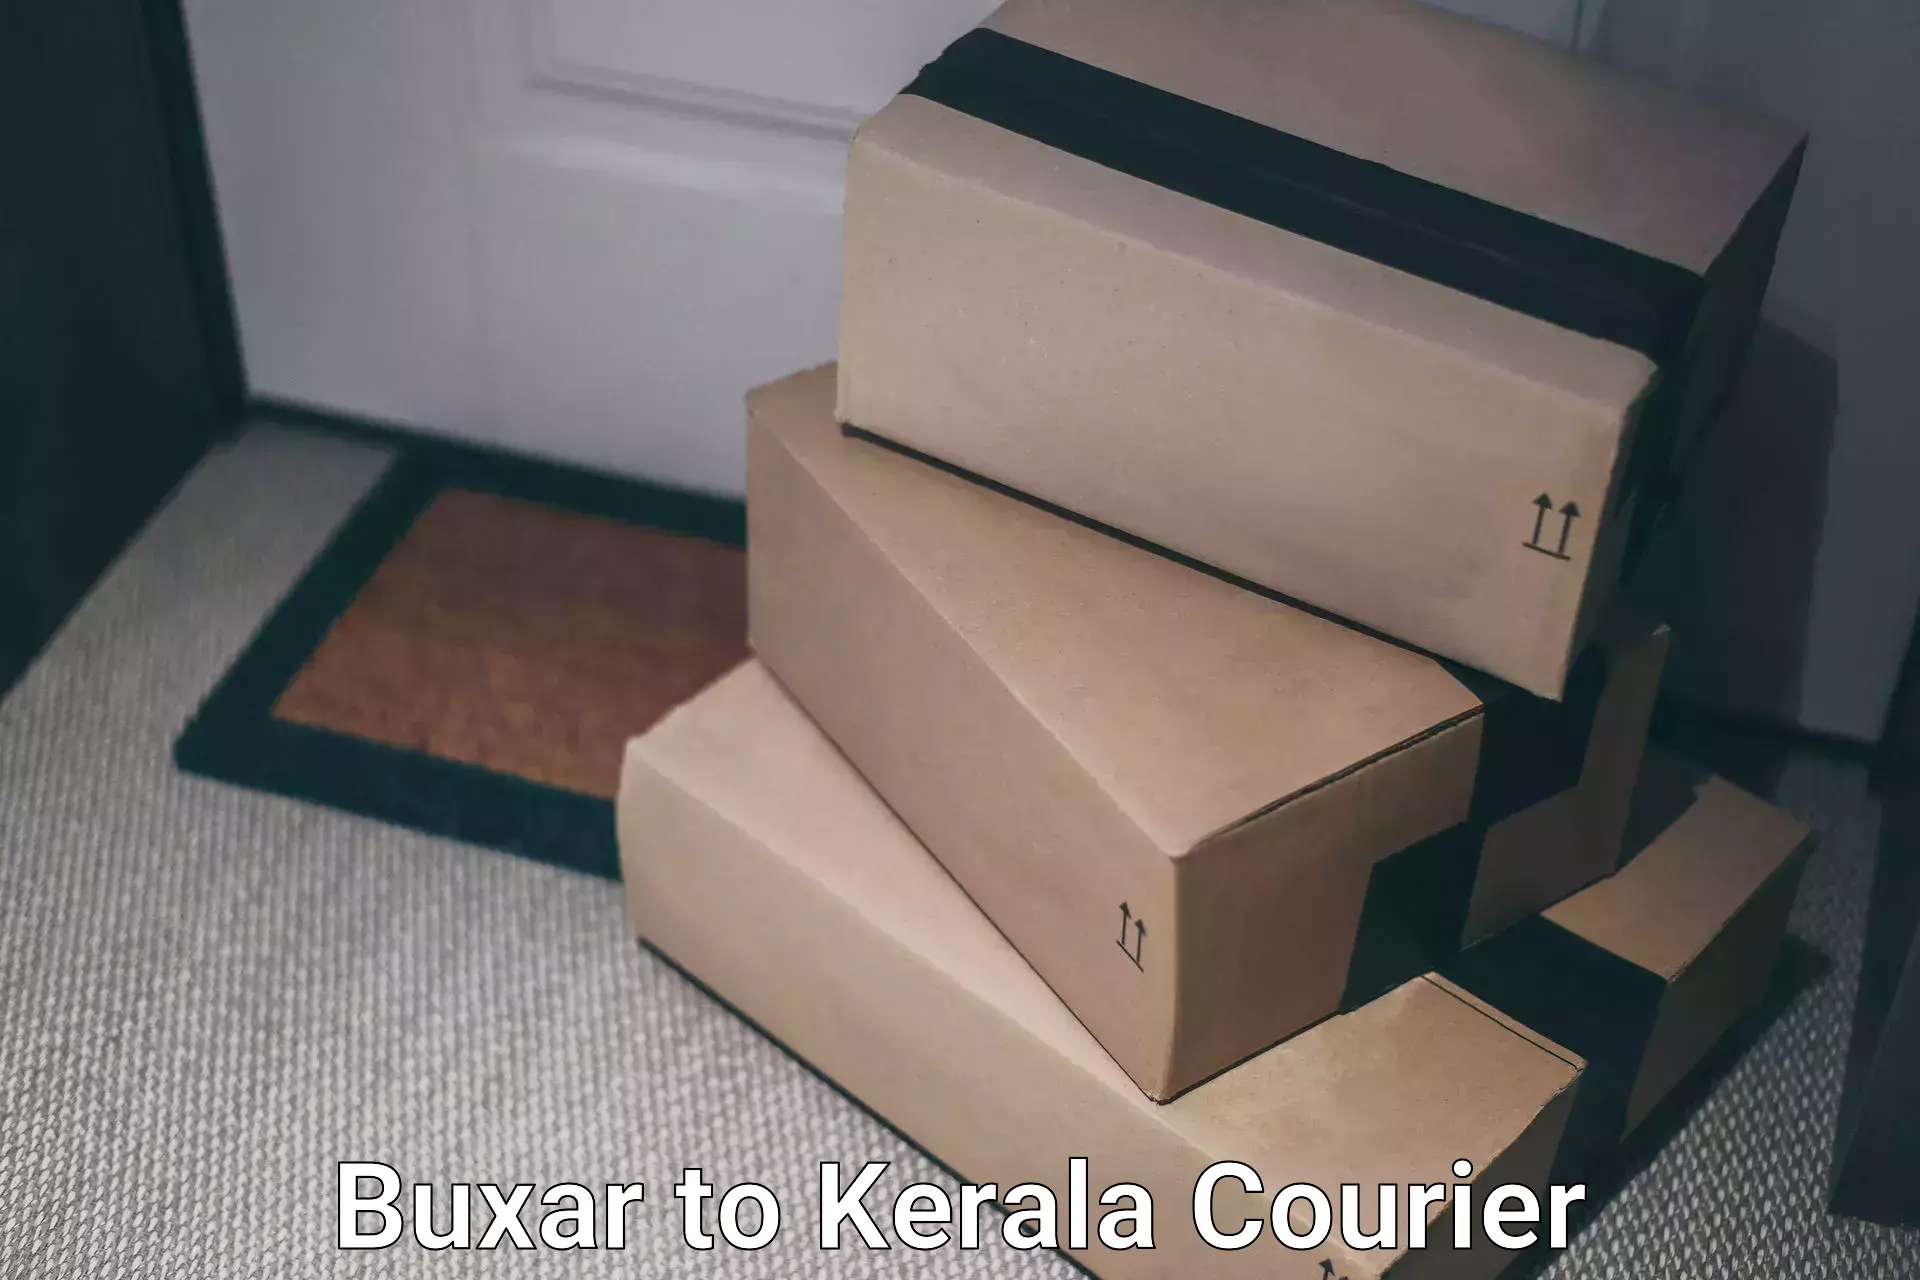 User-friendly delivery service Buxar to IIIT Kottayam